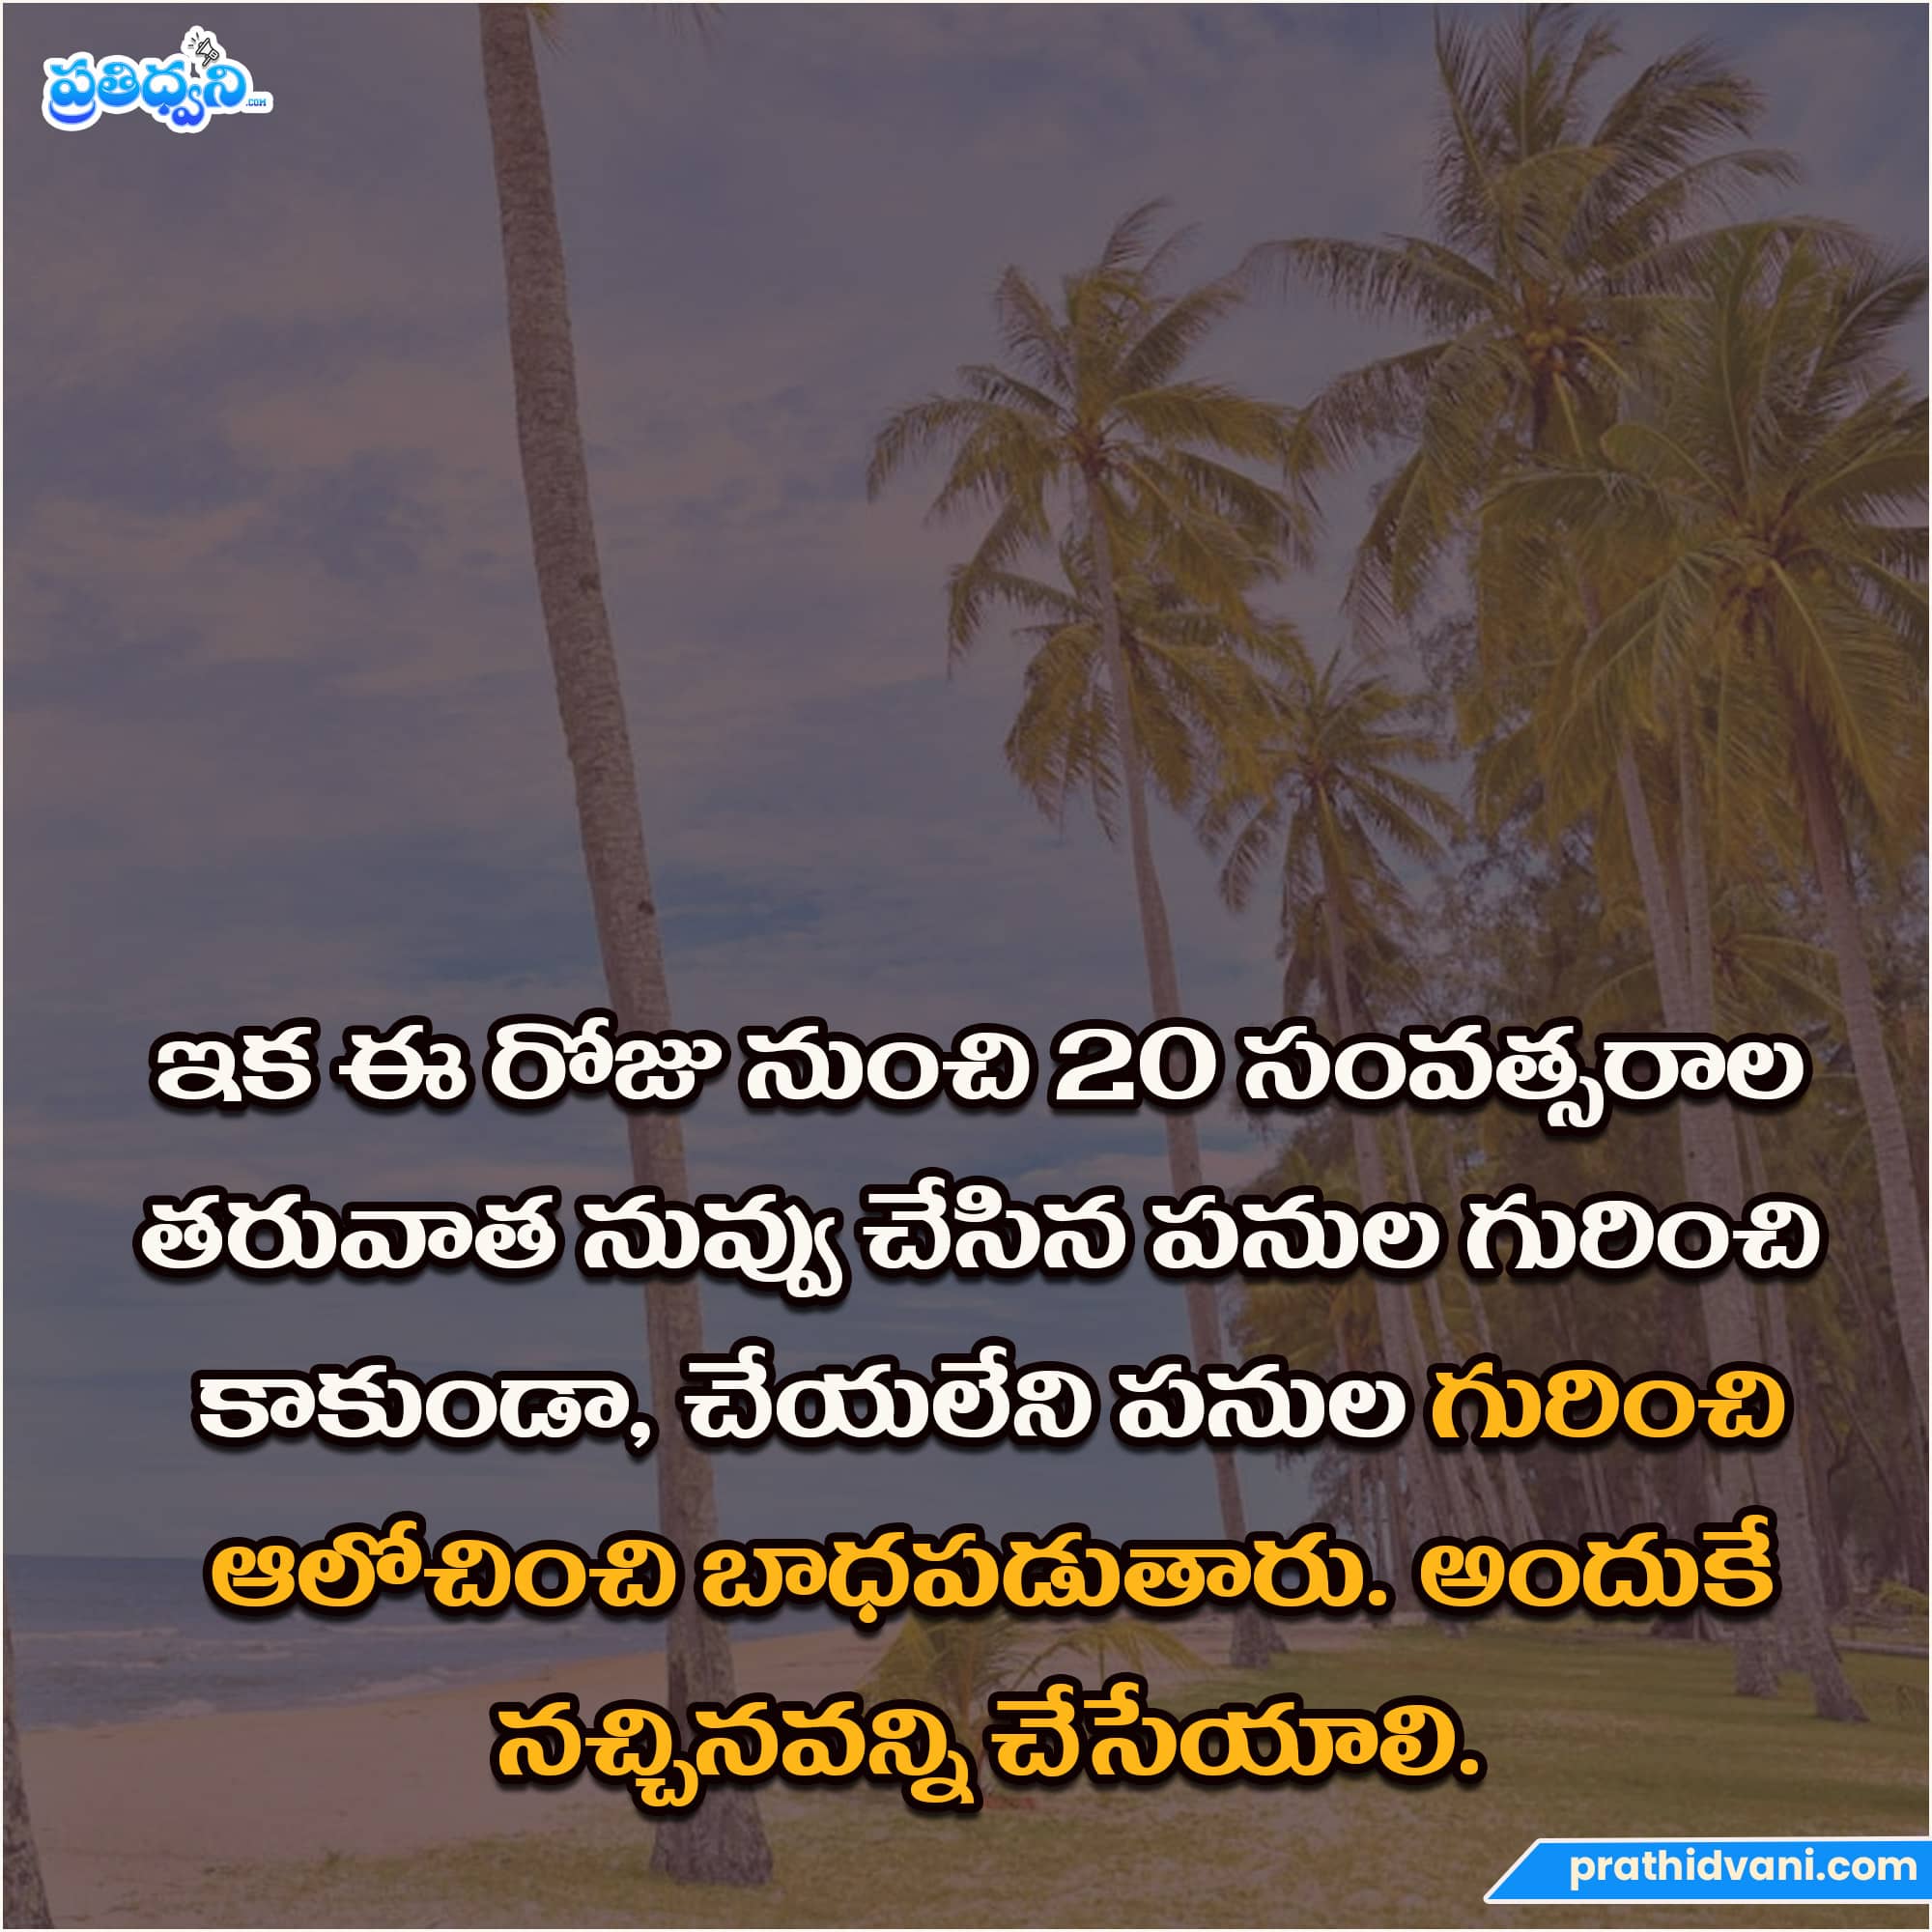 Latest Telugu Quotes and Quotations in Telugu Text 